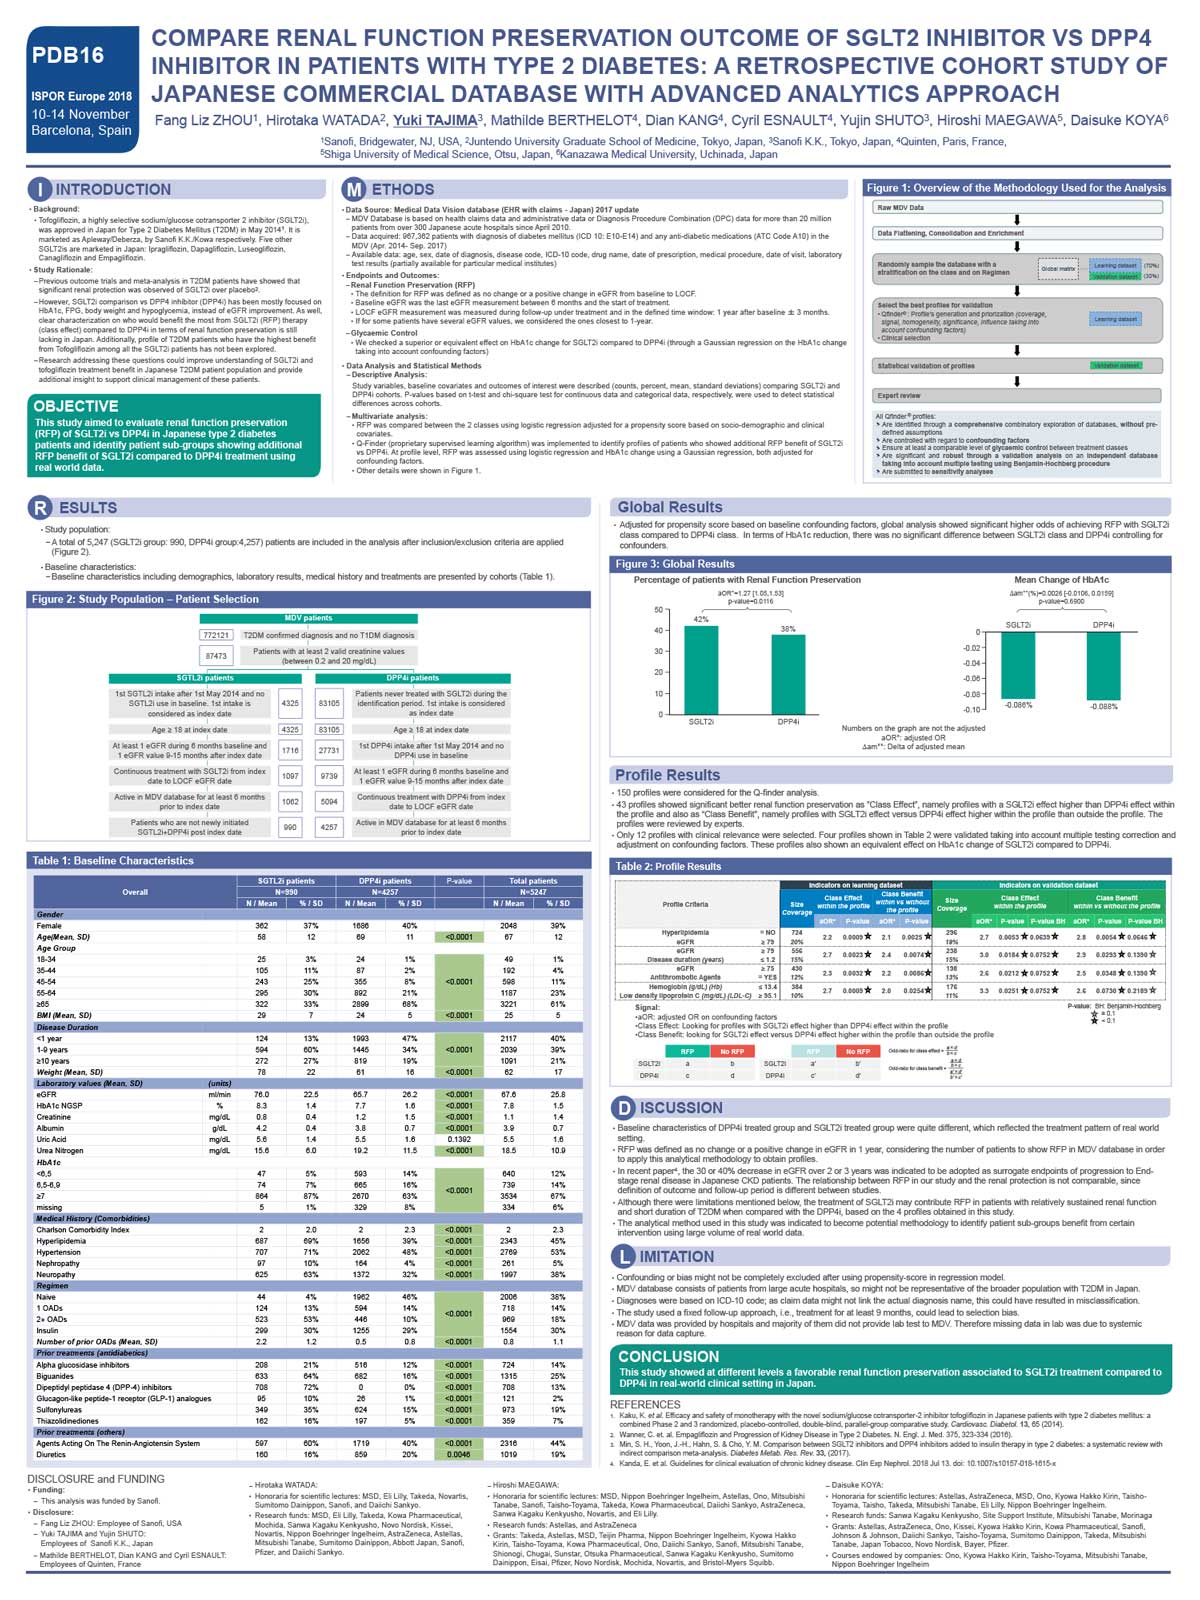 A visual of the poster: Compare renal function preservation outcome of SGLT2 Inhibitor vs. DPP4 Inhibitor in patients with type 2 diabetes: a retrospective cohort study of Japanese commercial database with advanced analytics approach